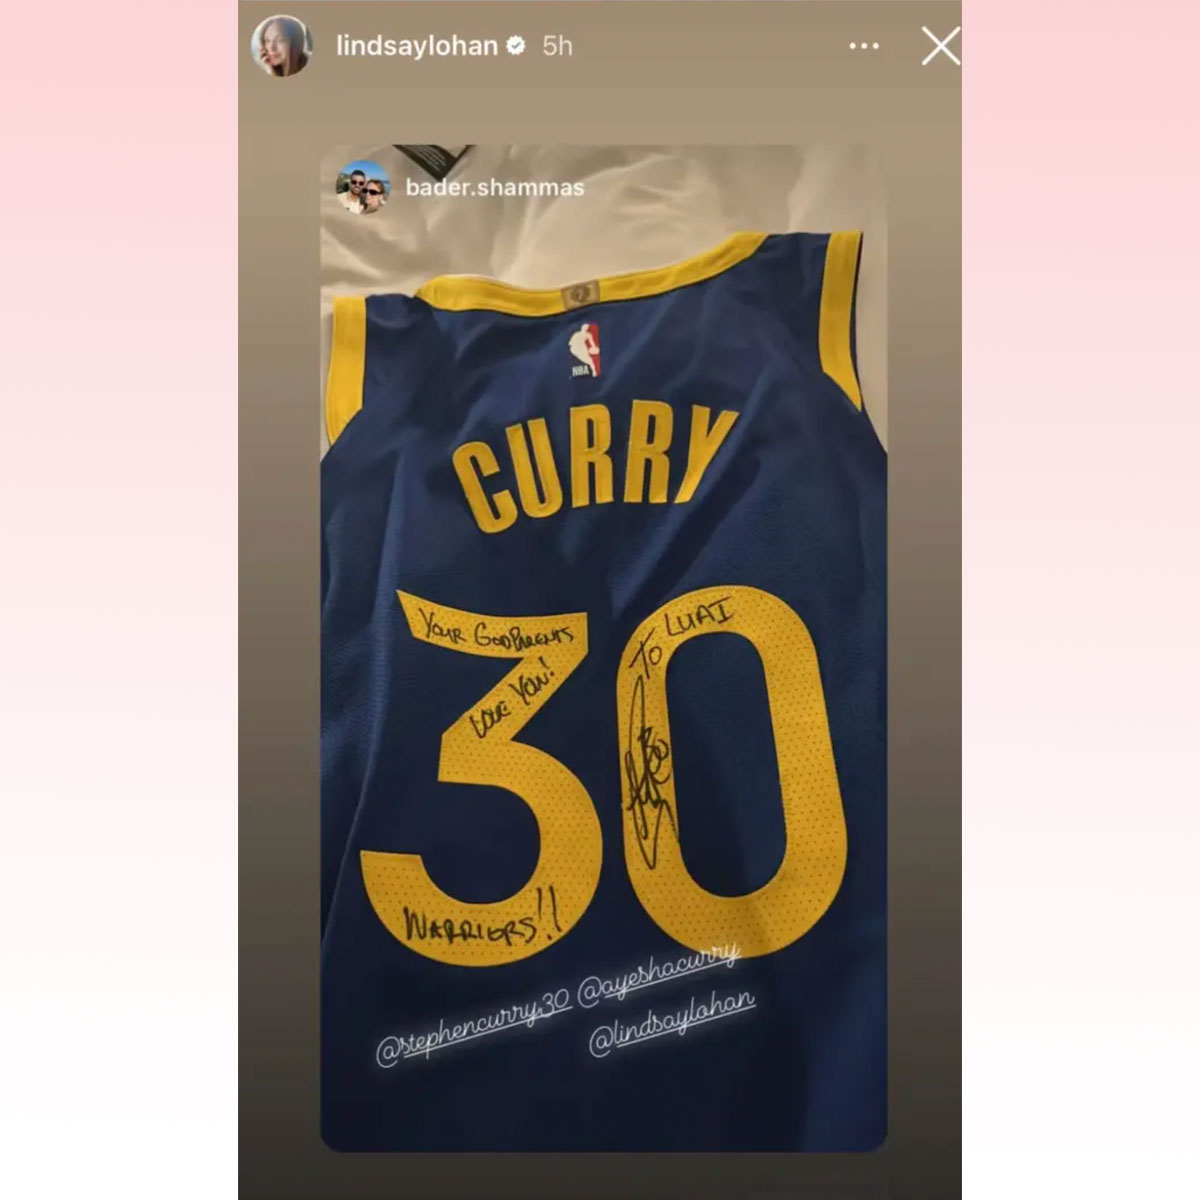 Steph Curry Signed Jersey For Lindsay Lohan's Son